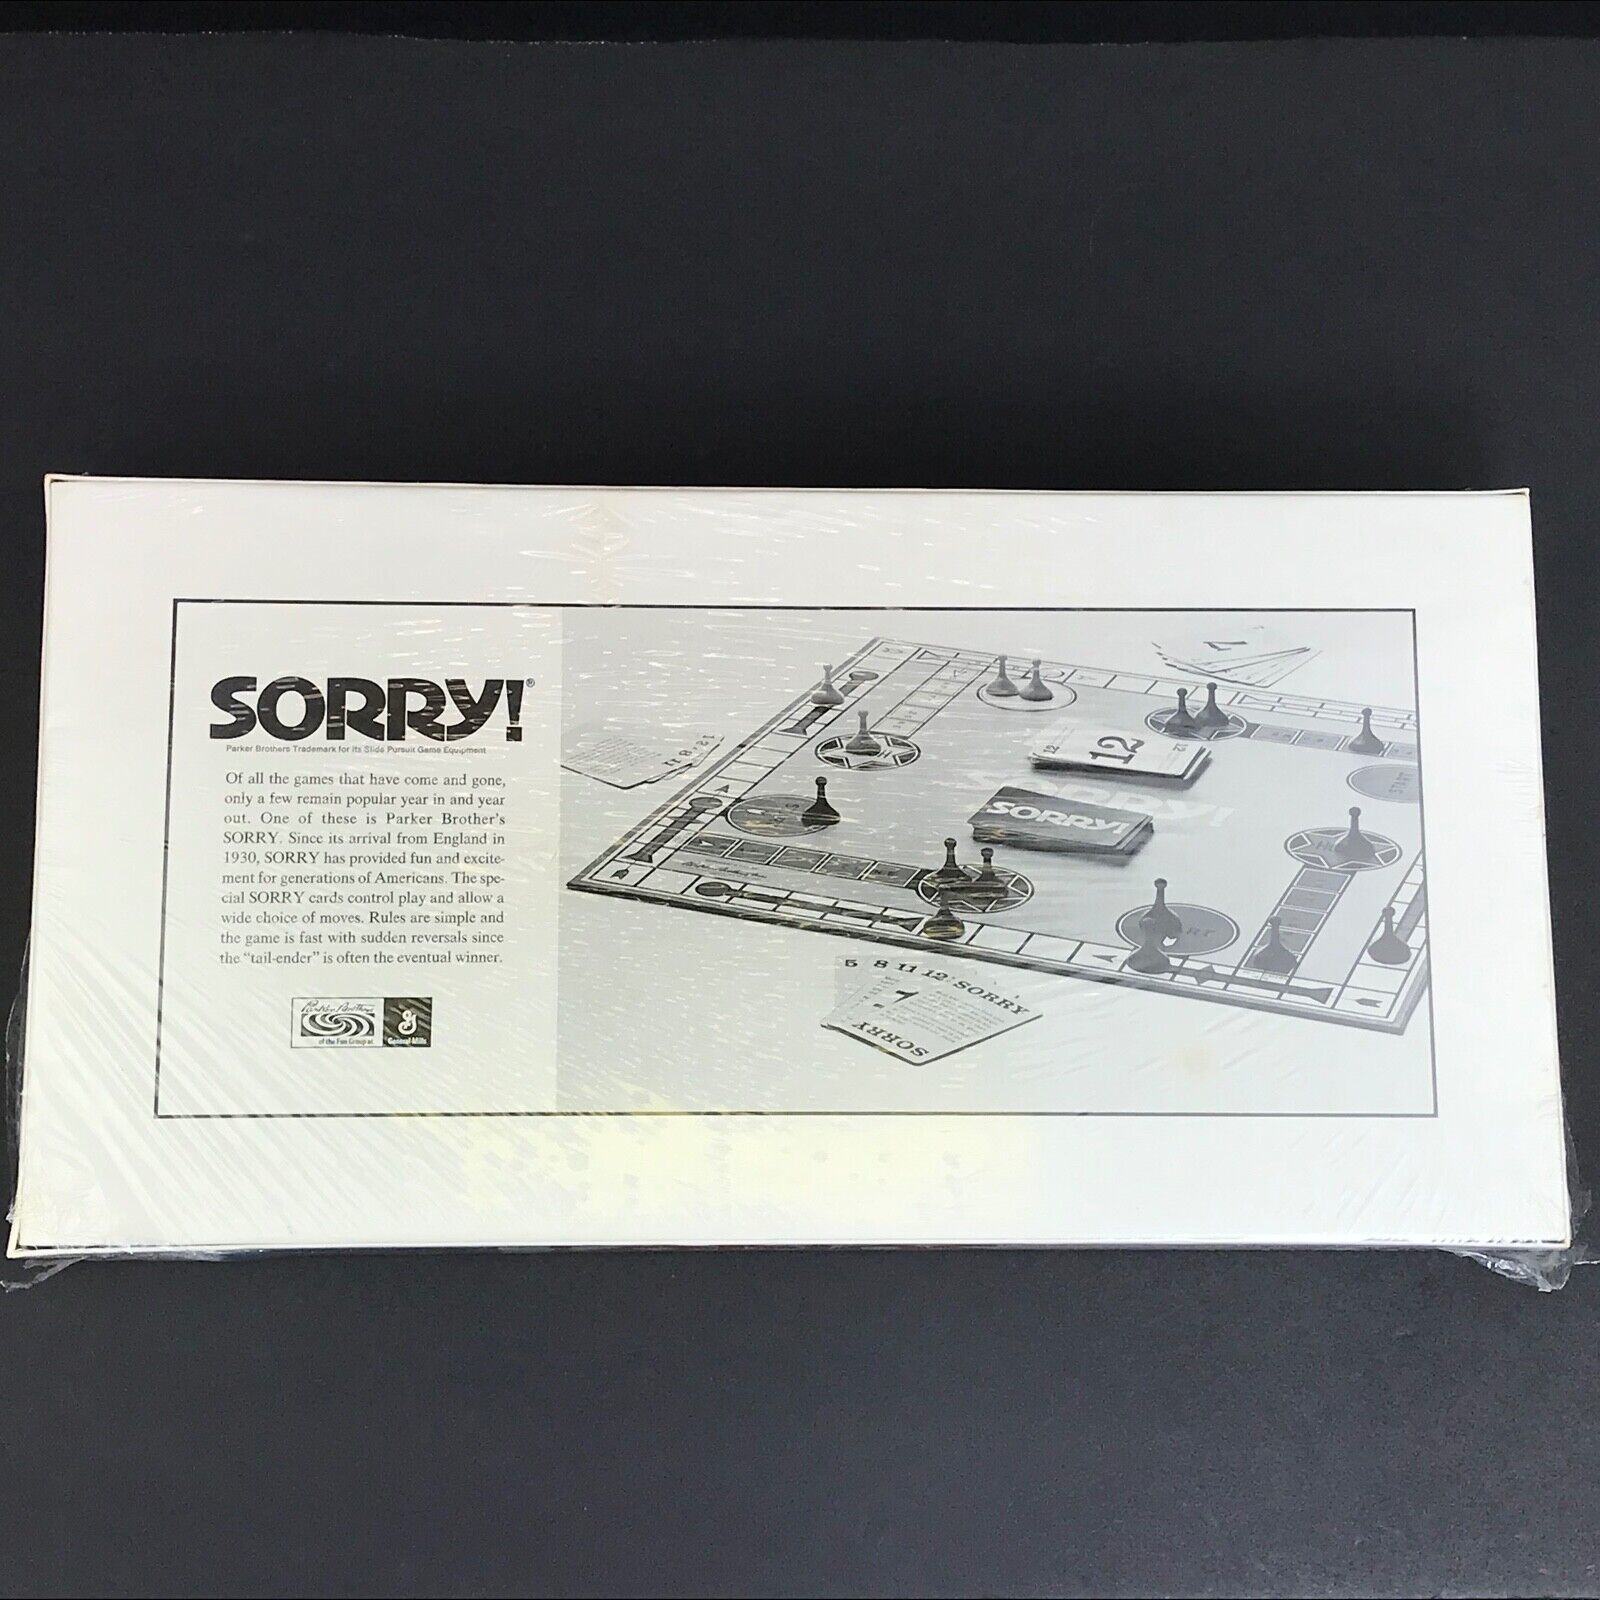 SORRY! 1972 Classic Family Board Game NO. 390 Parker Brothers New Sealed Vintage - $69.28